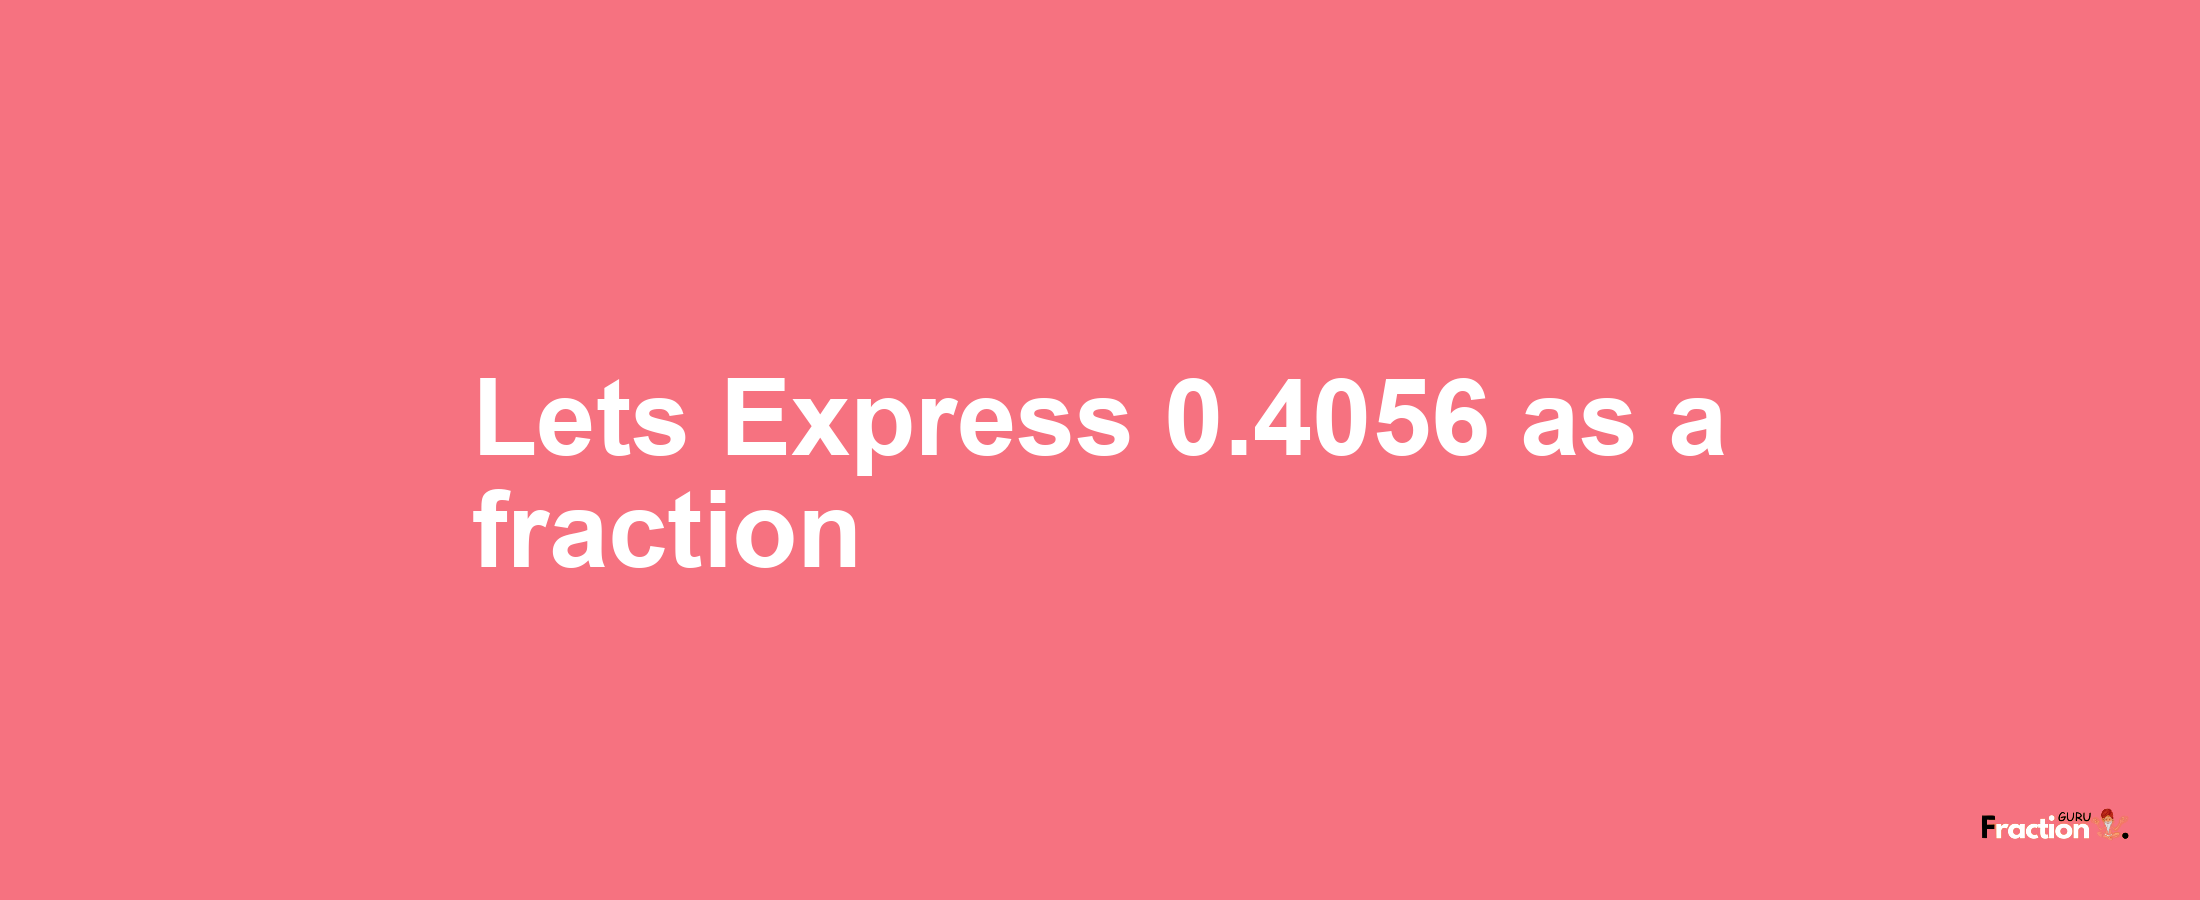 Lets Express 0.4056 as afraction